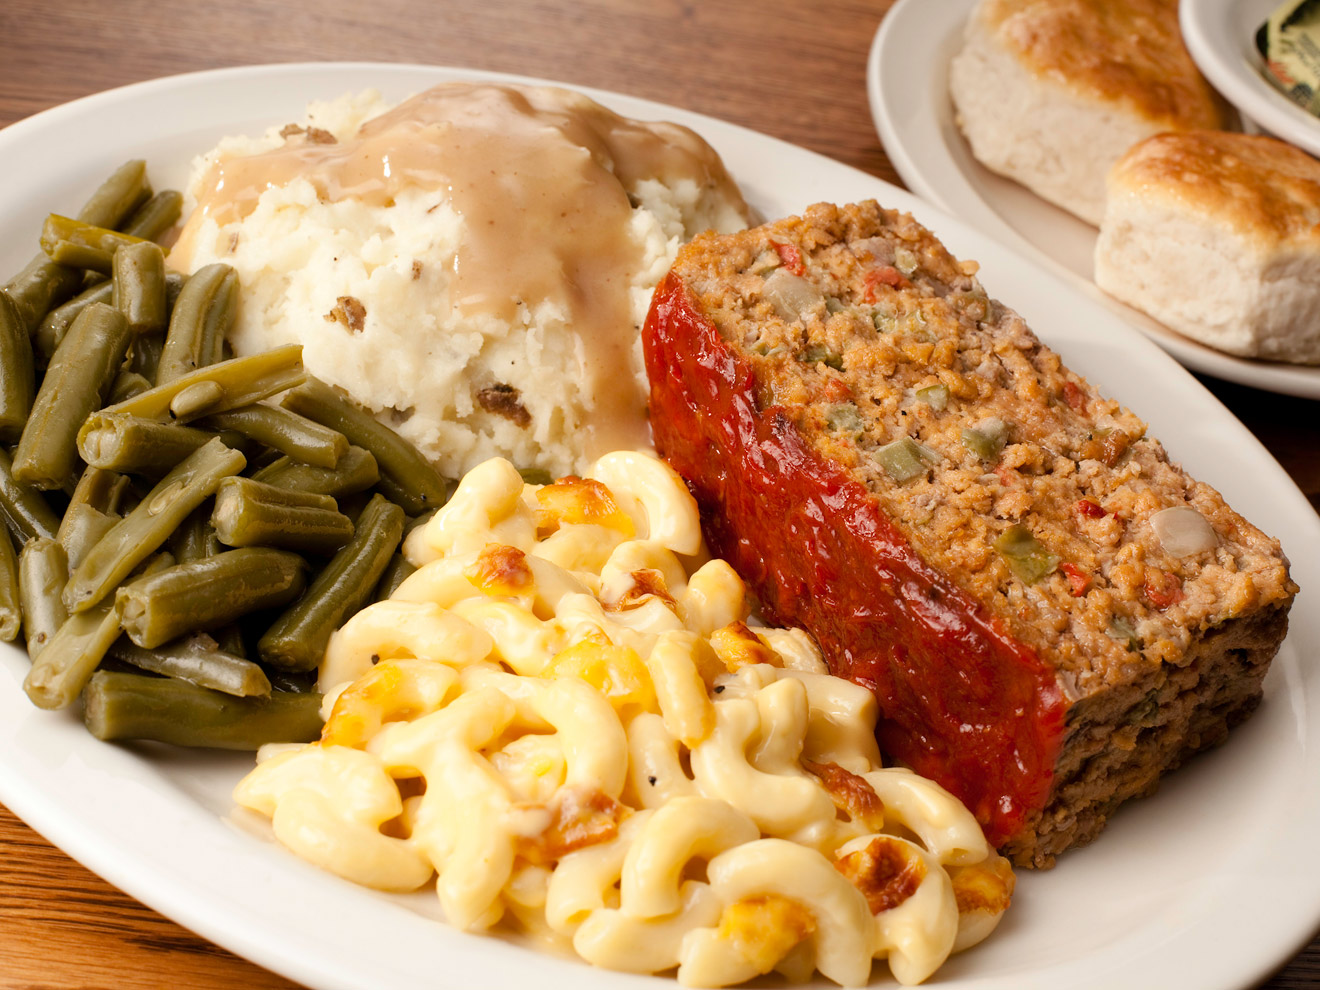 Cracker Barrel Serves Down-Home Country Meals You’ll Love | Family